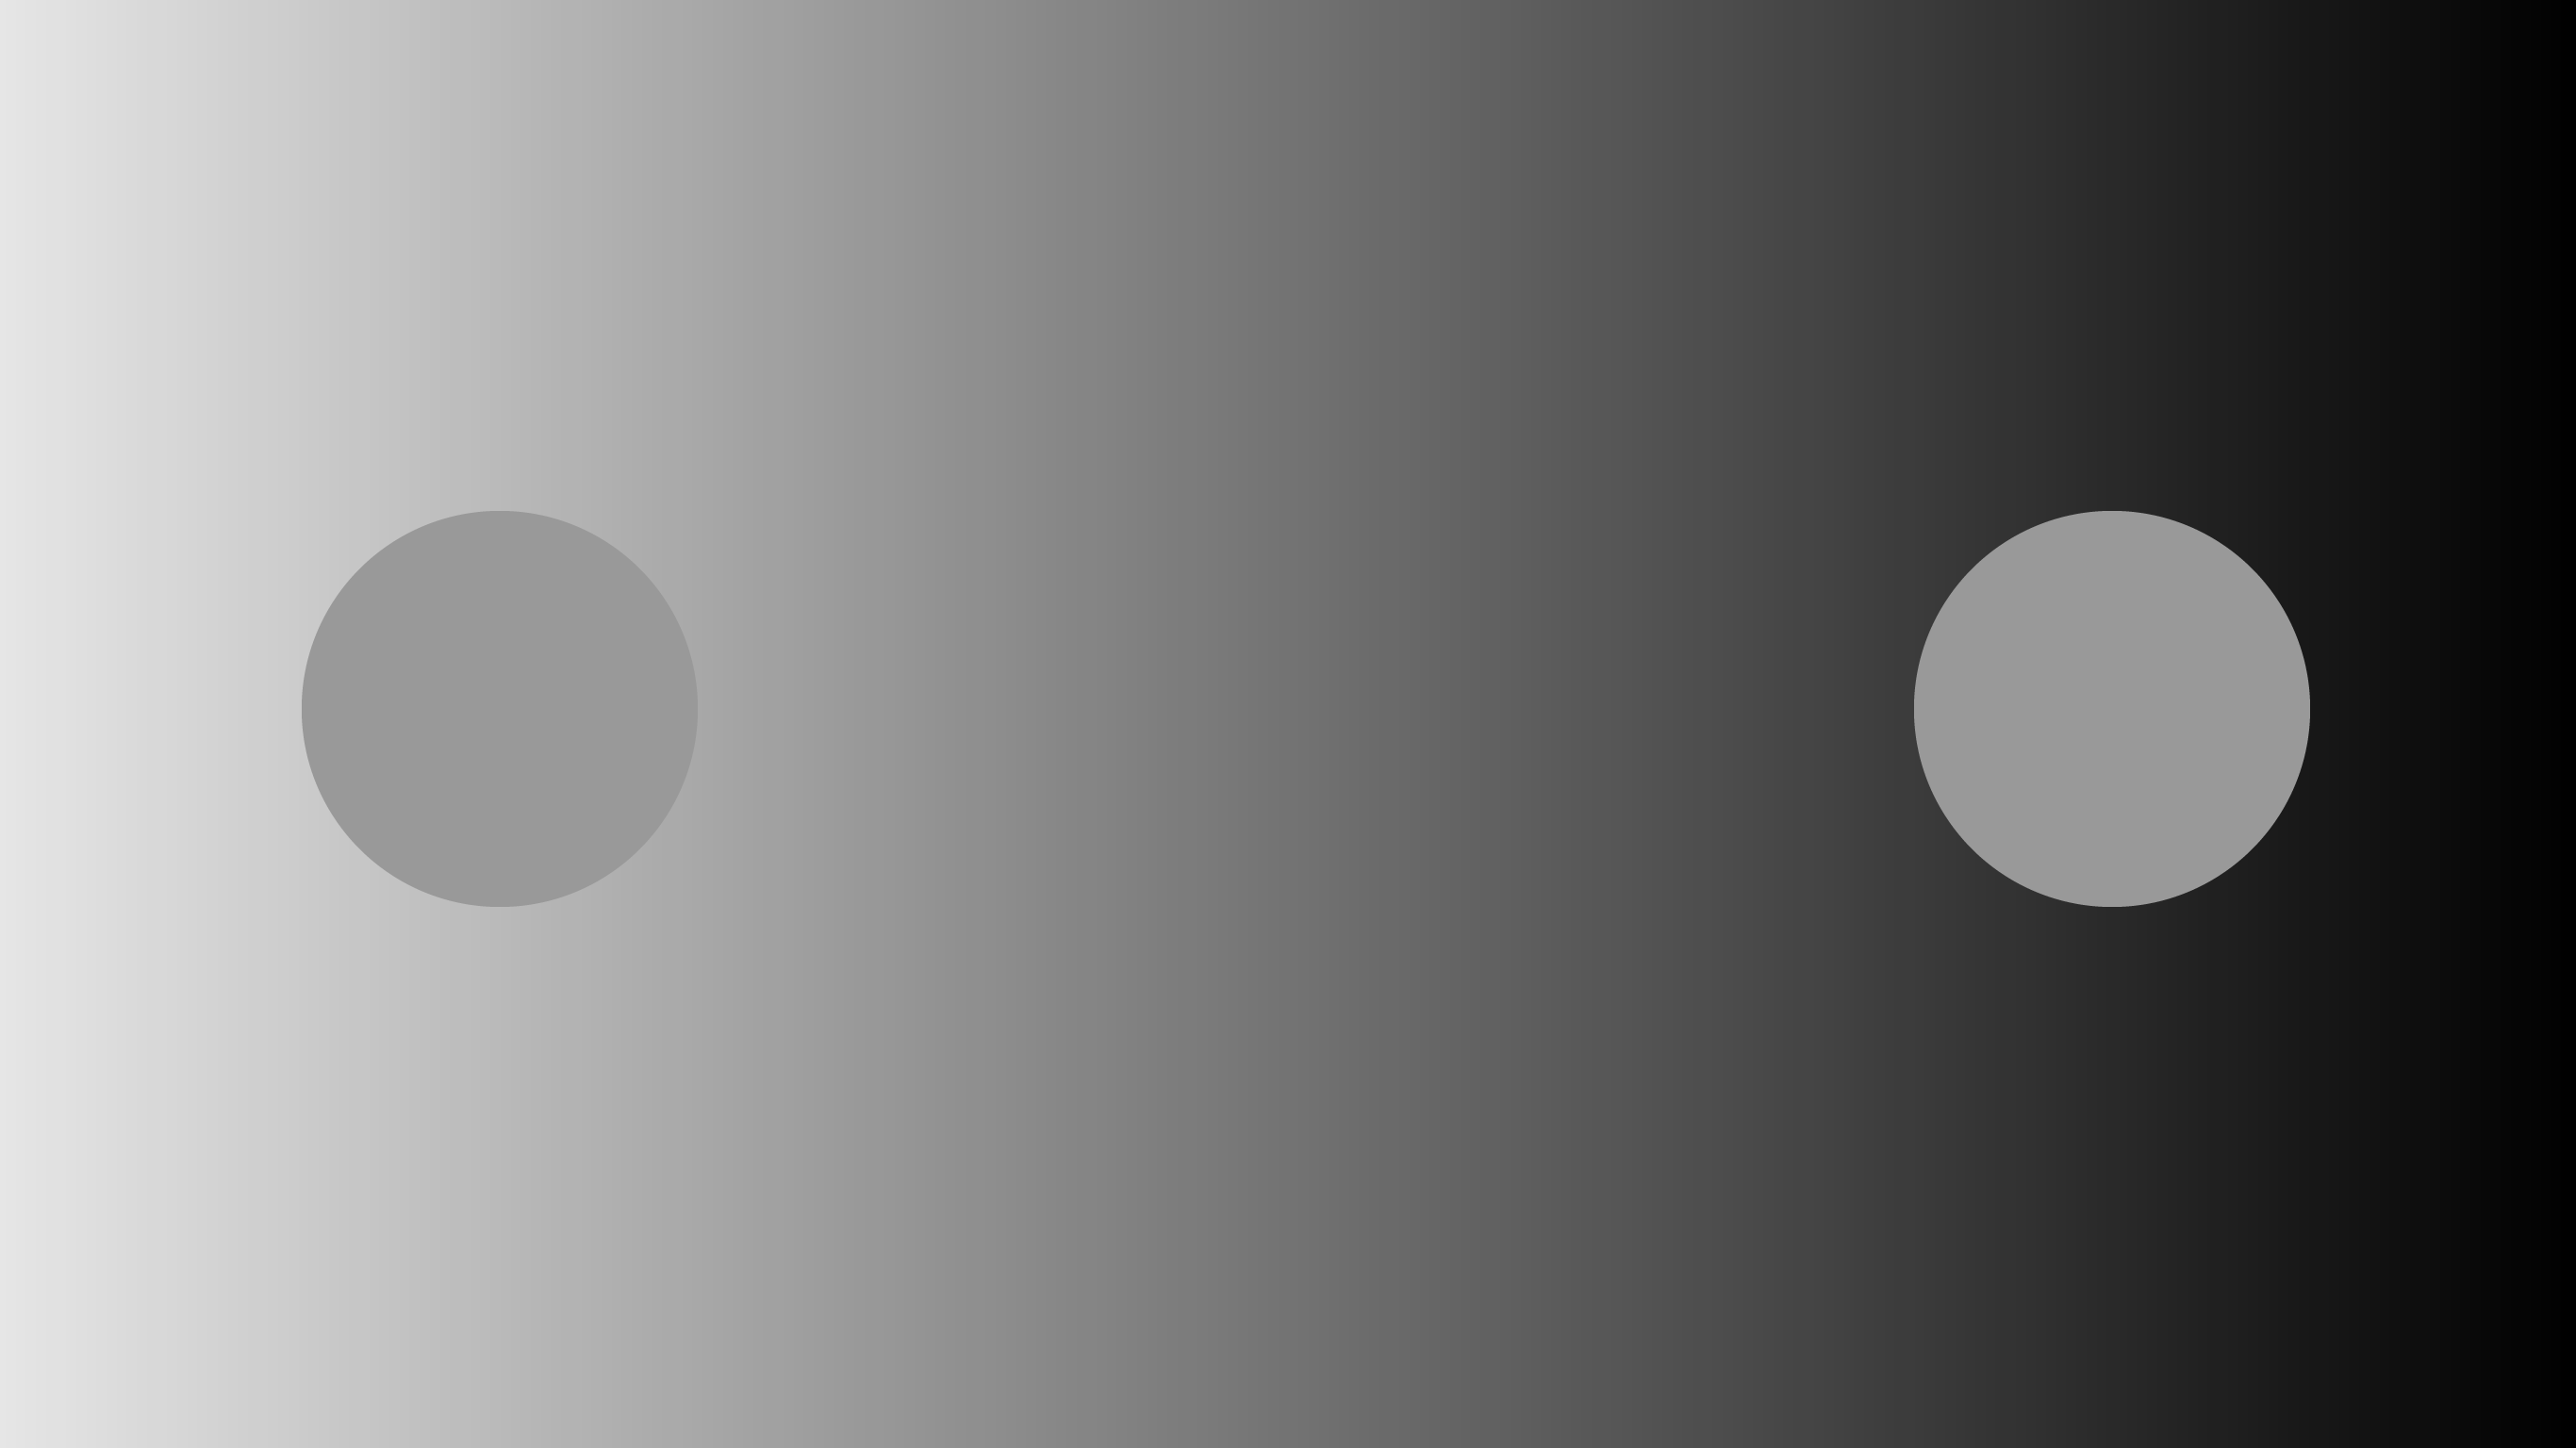 2 grey circles plotted next to each other on a background with a light to dark grey background